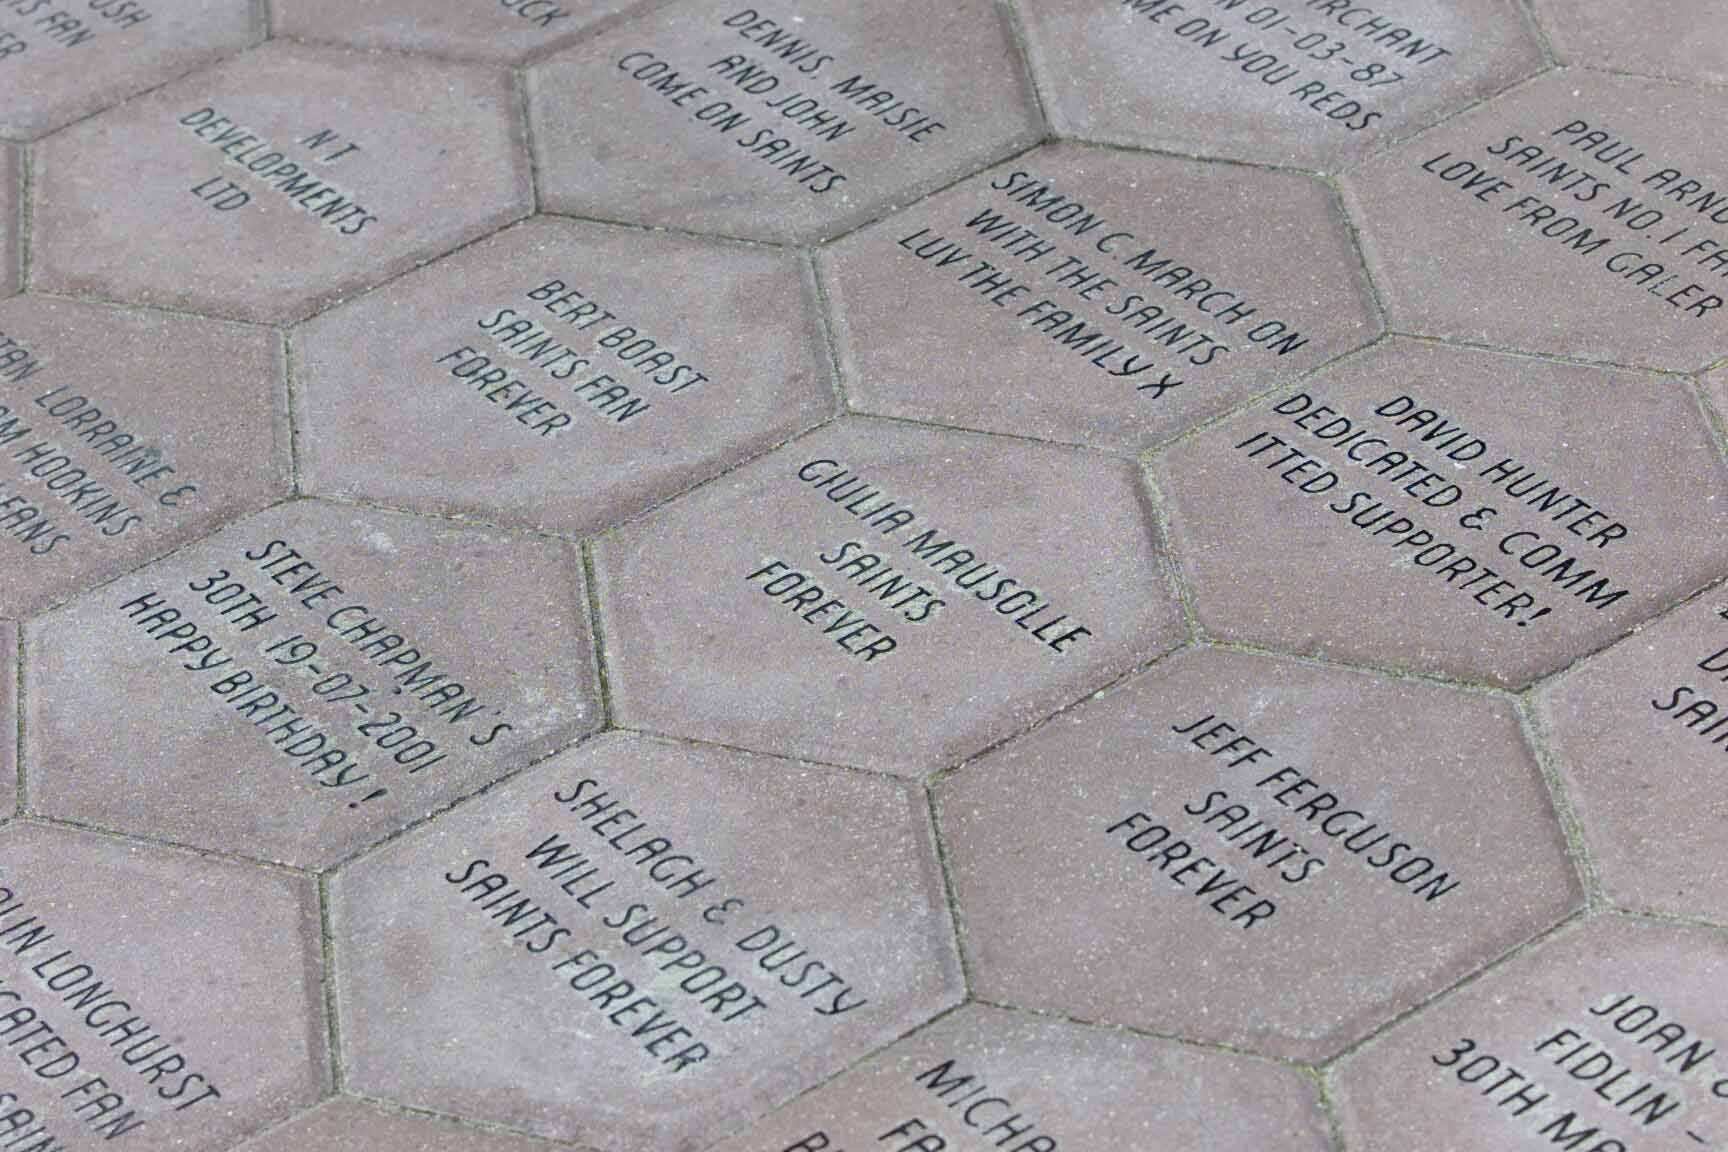 TOUR OF THE ST MARYS STADIUM NEW GROUND OF THE SAINTS NAMED PAVING STONES